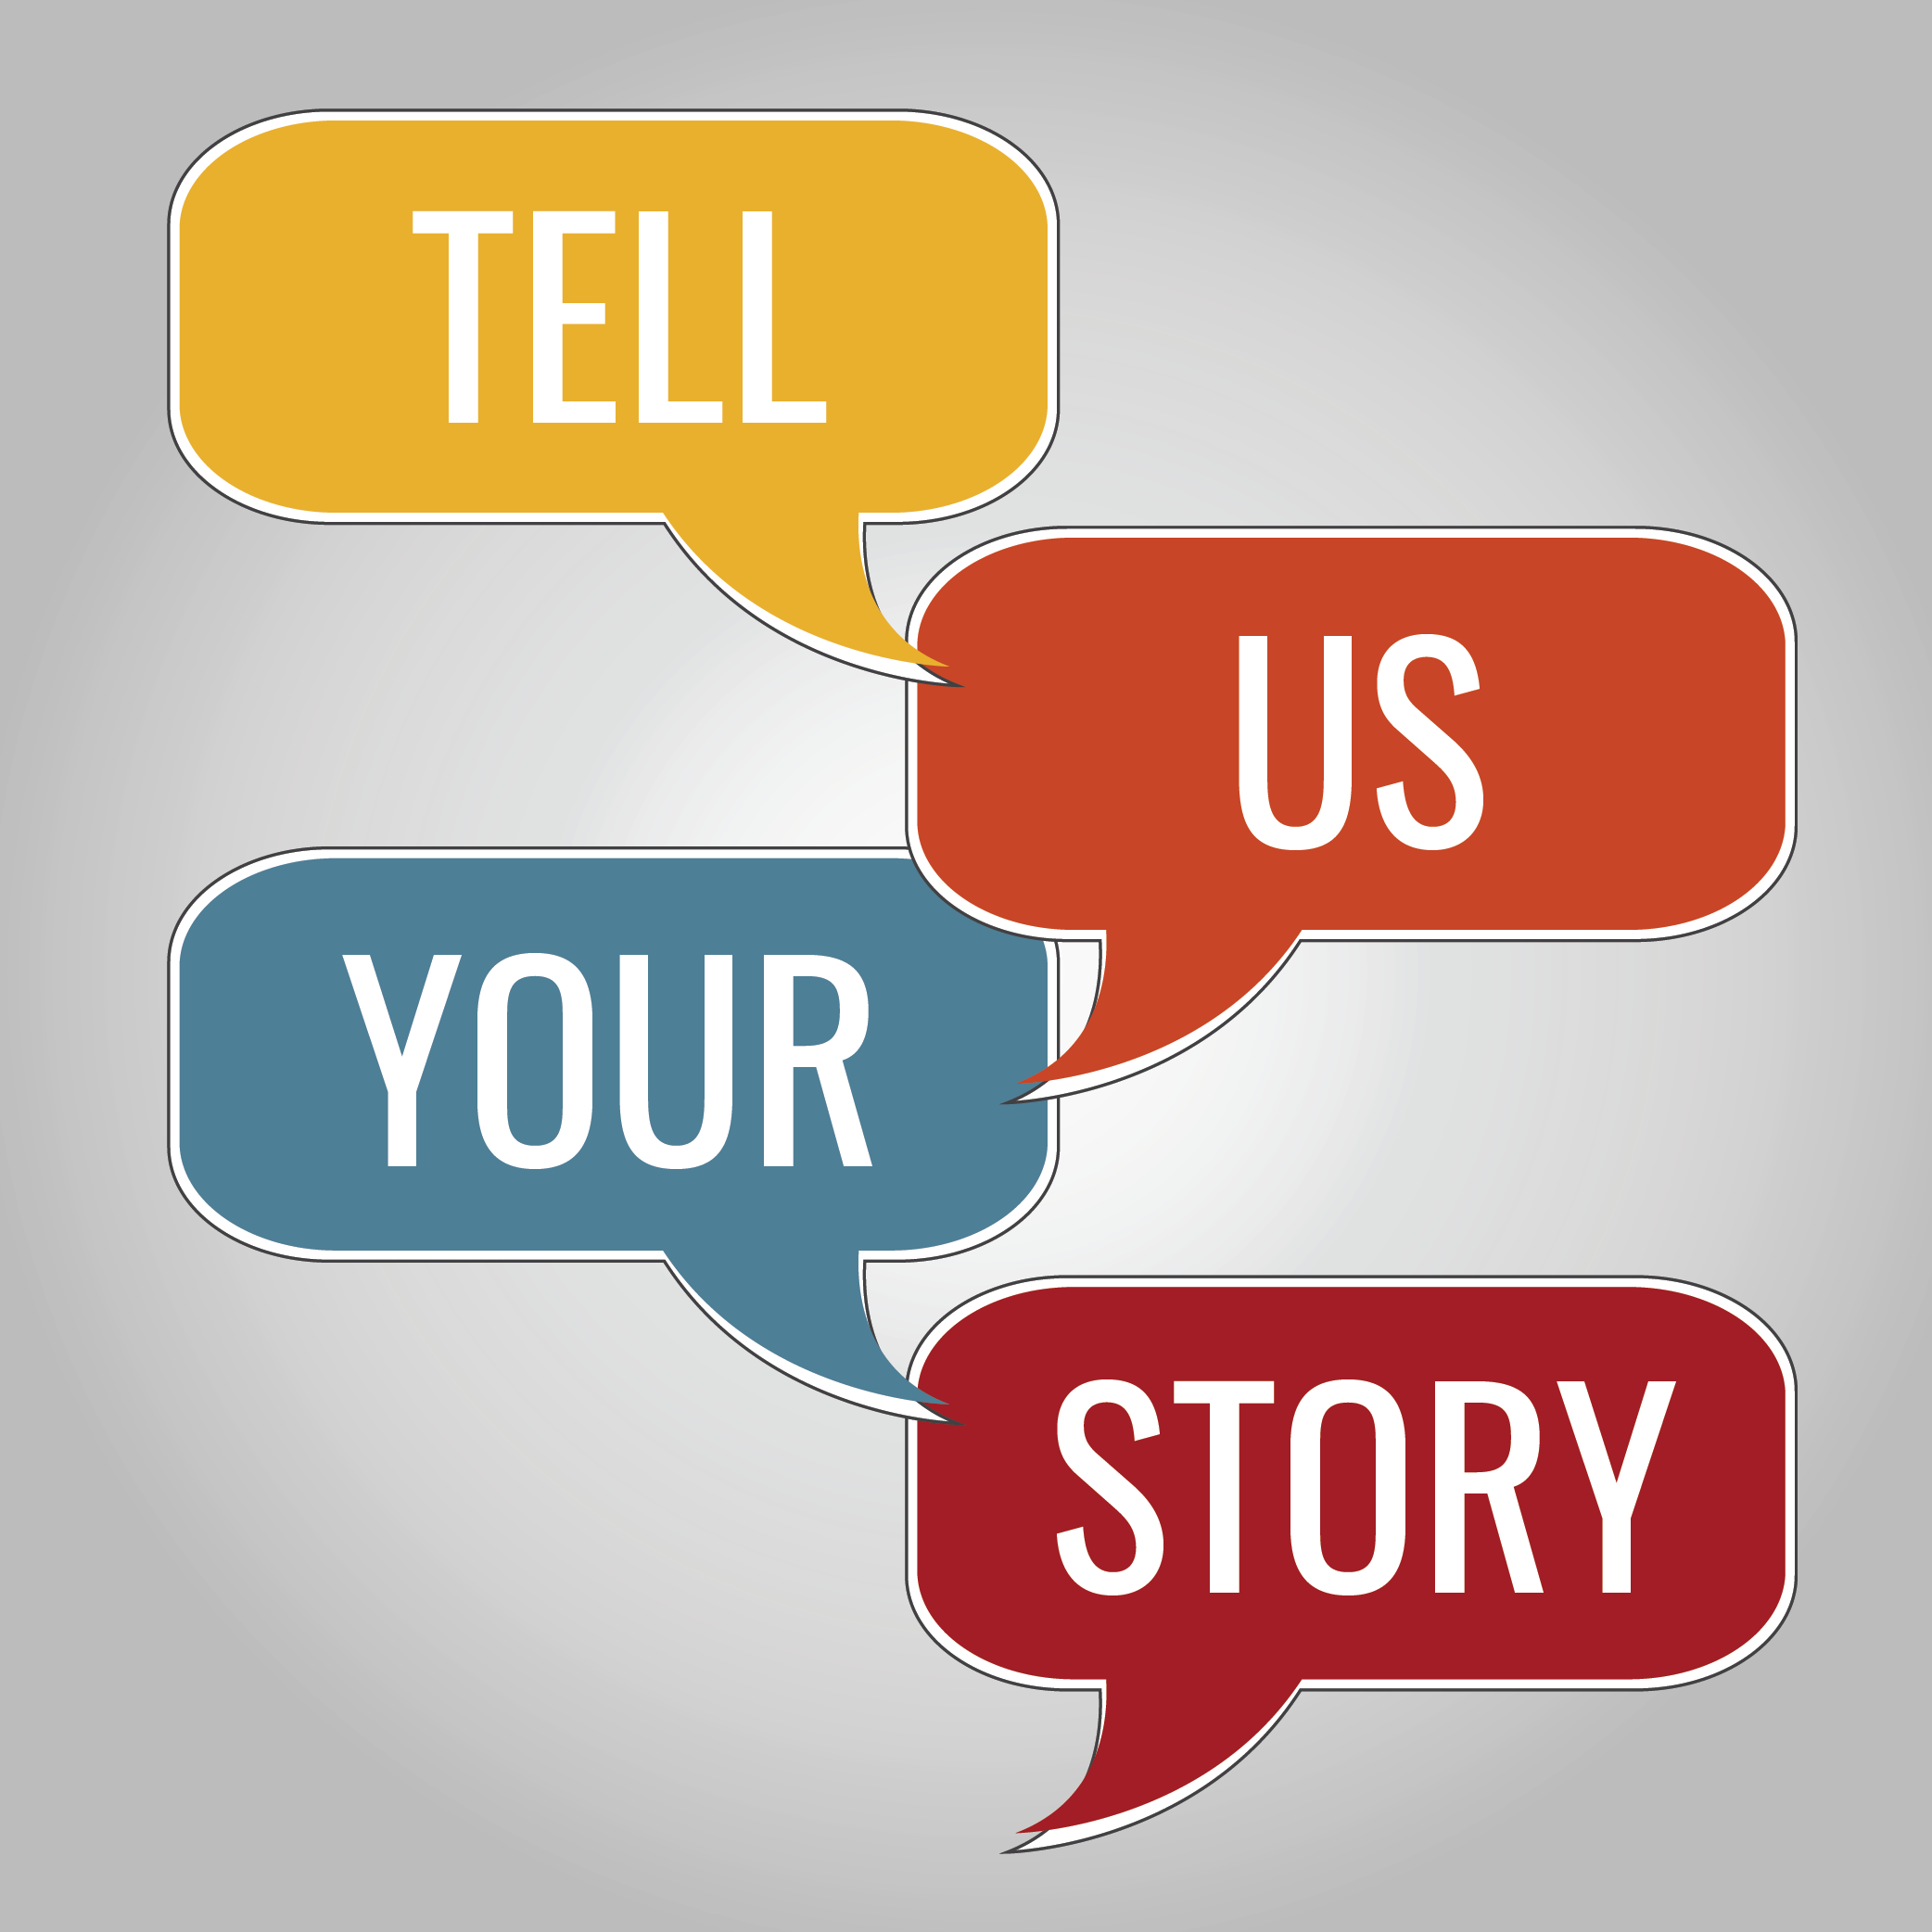 *Tell Us Your Story image